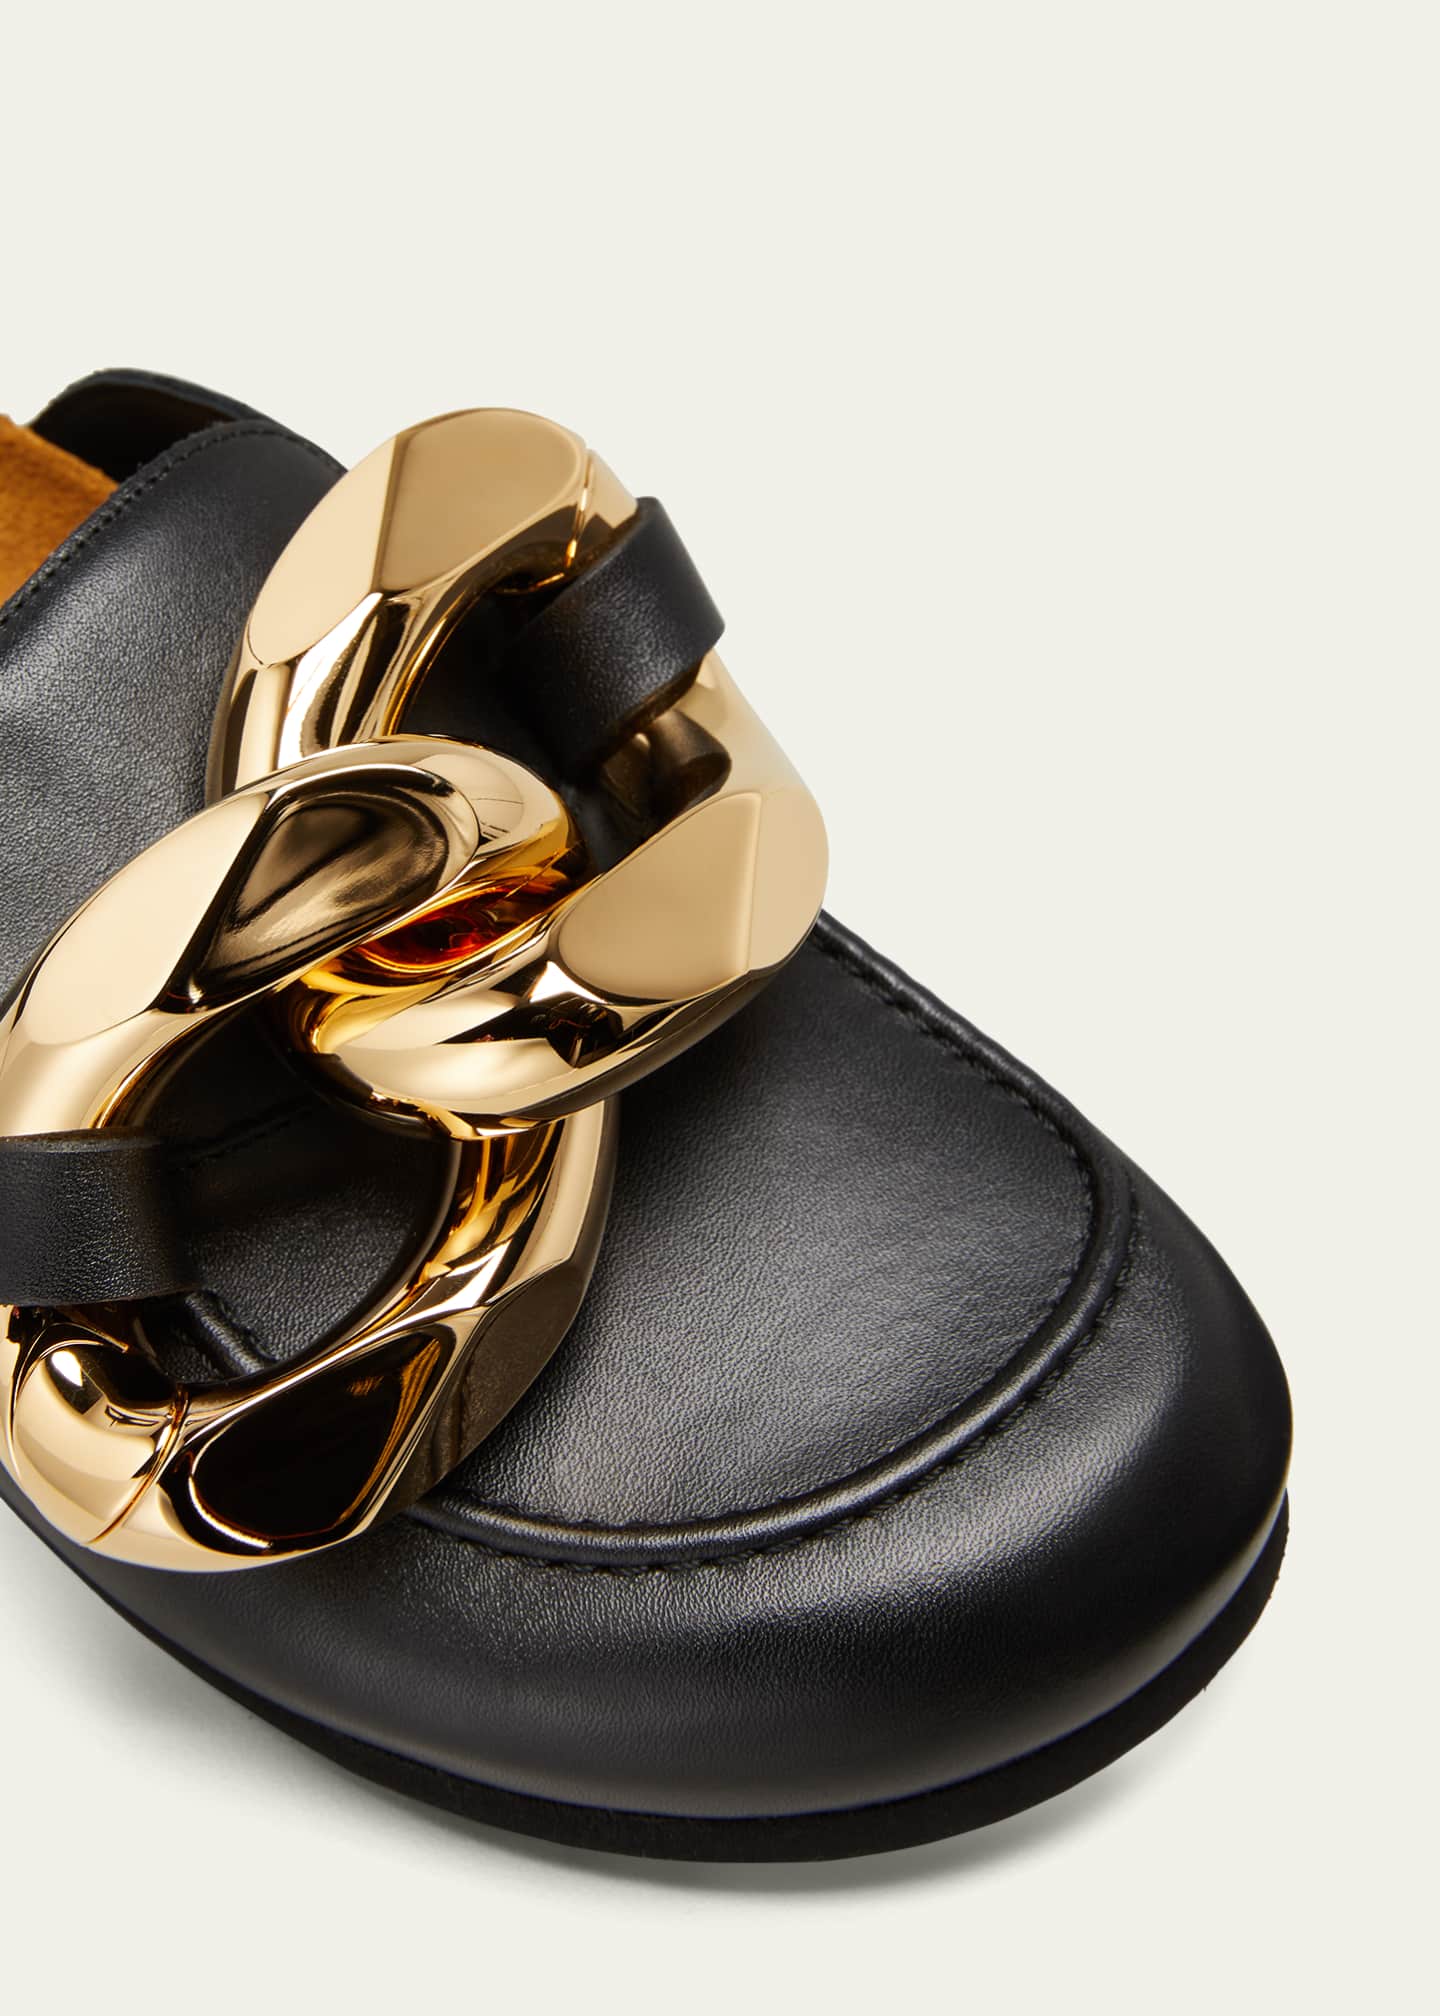 JW Anderson Chunky Napa Chain Slide Mules Image 5 of 5